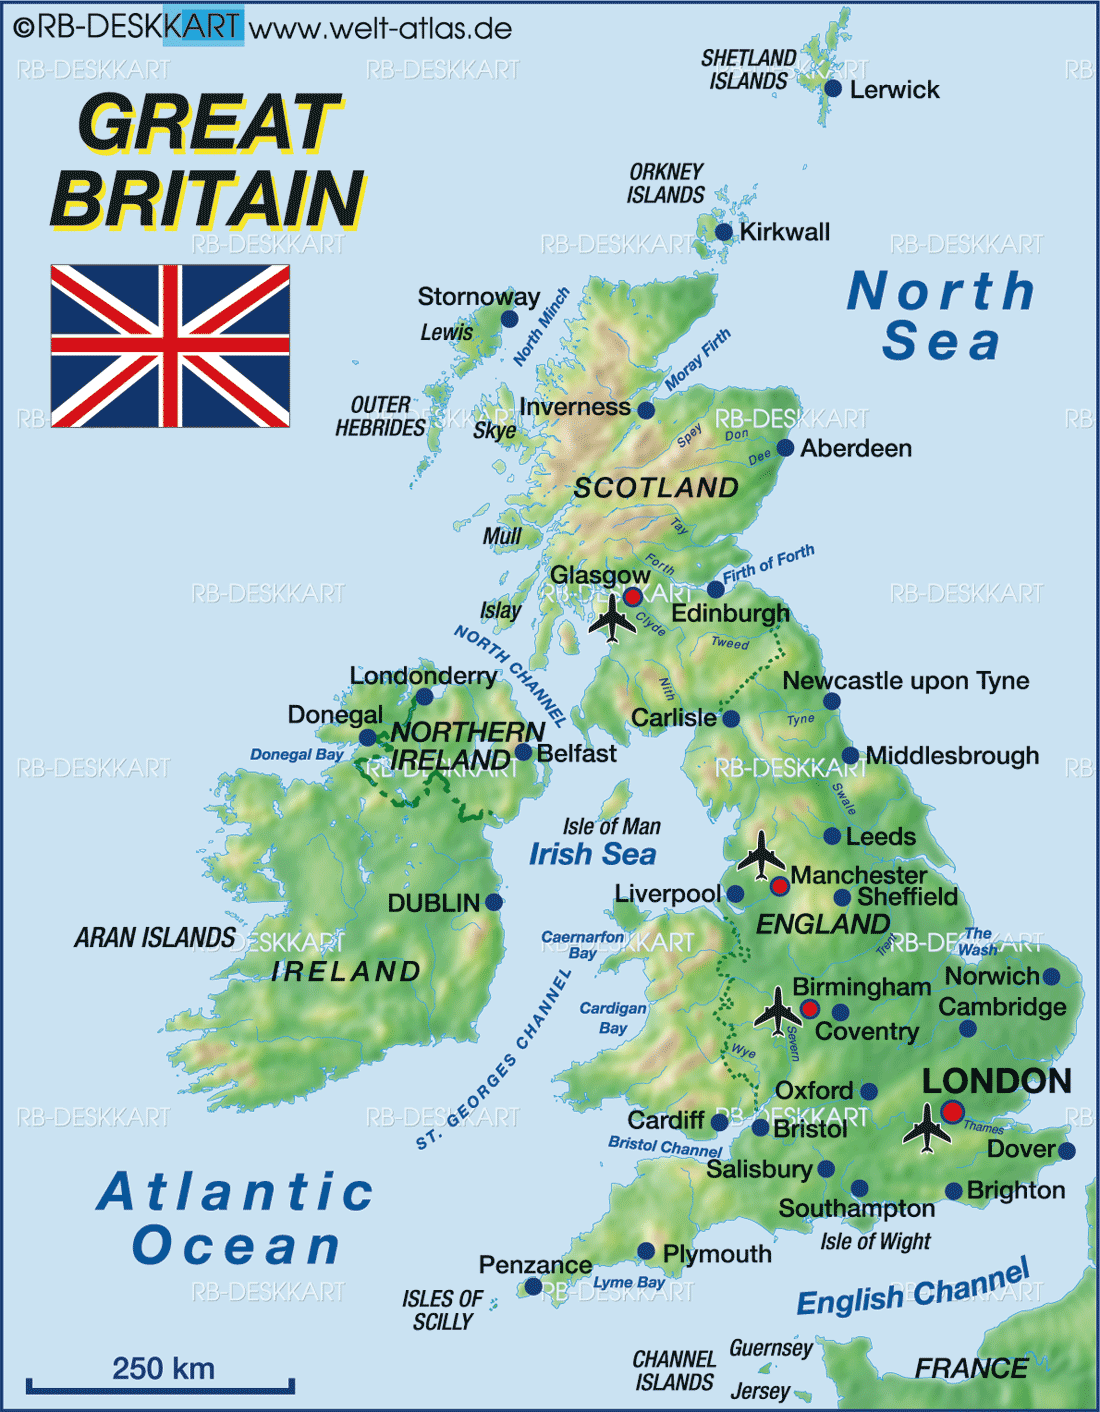 When to the uk. The United Kingdom of great Britain карта. The United Kingdom of great Britain and Northern Ireland карта. Карта the uk of great Britain and Northern Ireland. Great Britain Map geographical.